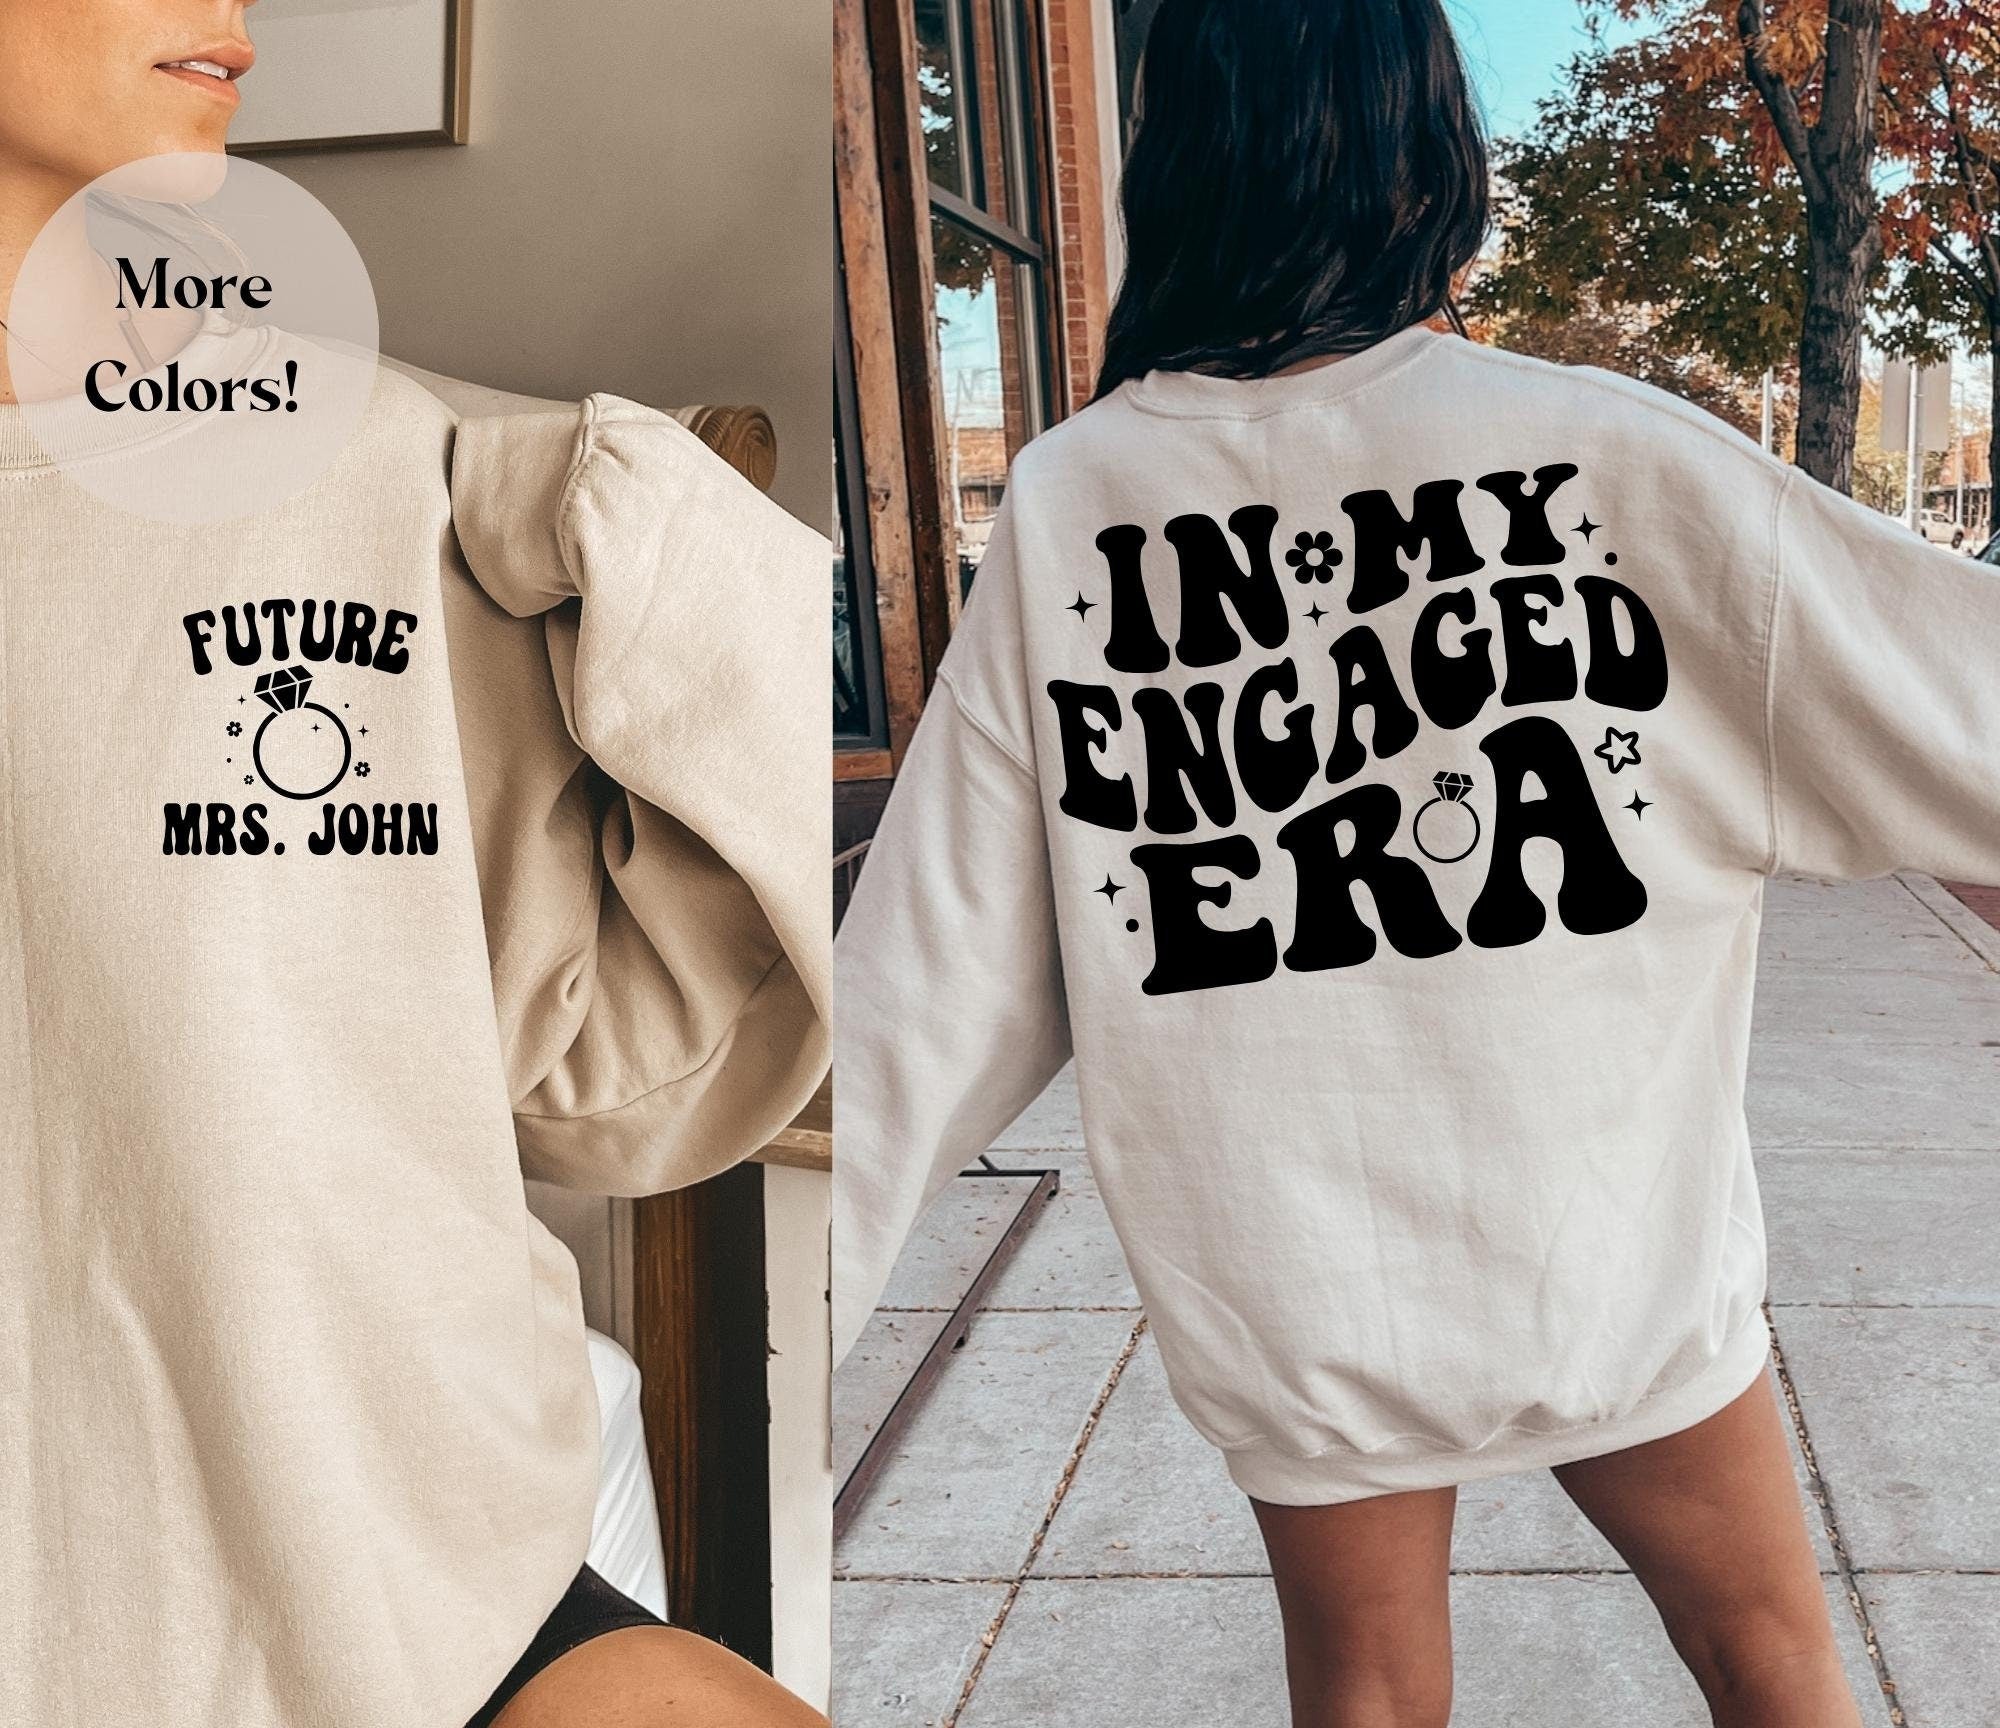 In My Engaged Era: Bridal Shower & Bachelorette Party Shirt